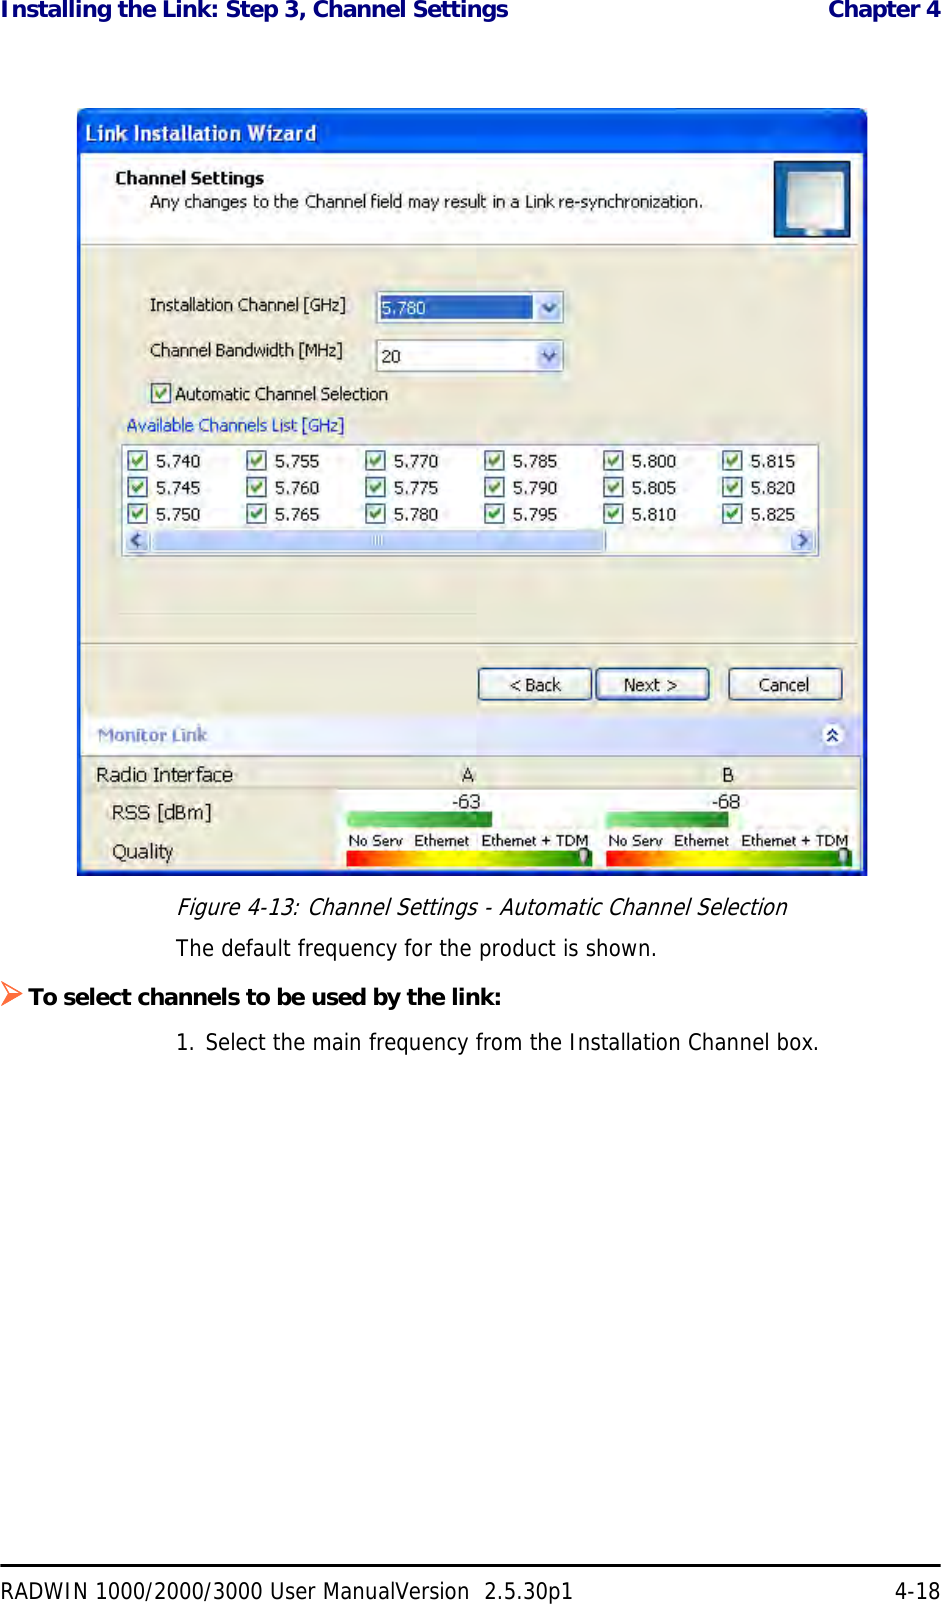 Installing the Link: Step 3, Channel Settings  Chapter 4RADWIN 1000/2000/3000 User ManualVersion  2.5.30p1 4-18Figure 4-13: Channel Settings - Automatic Channel SelectionThe default frequency for the product is shown.¾To select channels to be used by the link:1. Select the main frequency from the Installation Channel box.